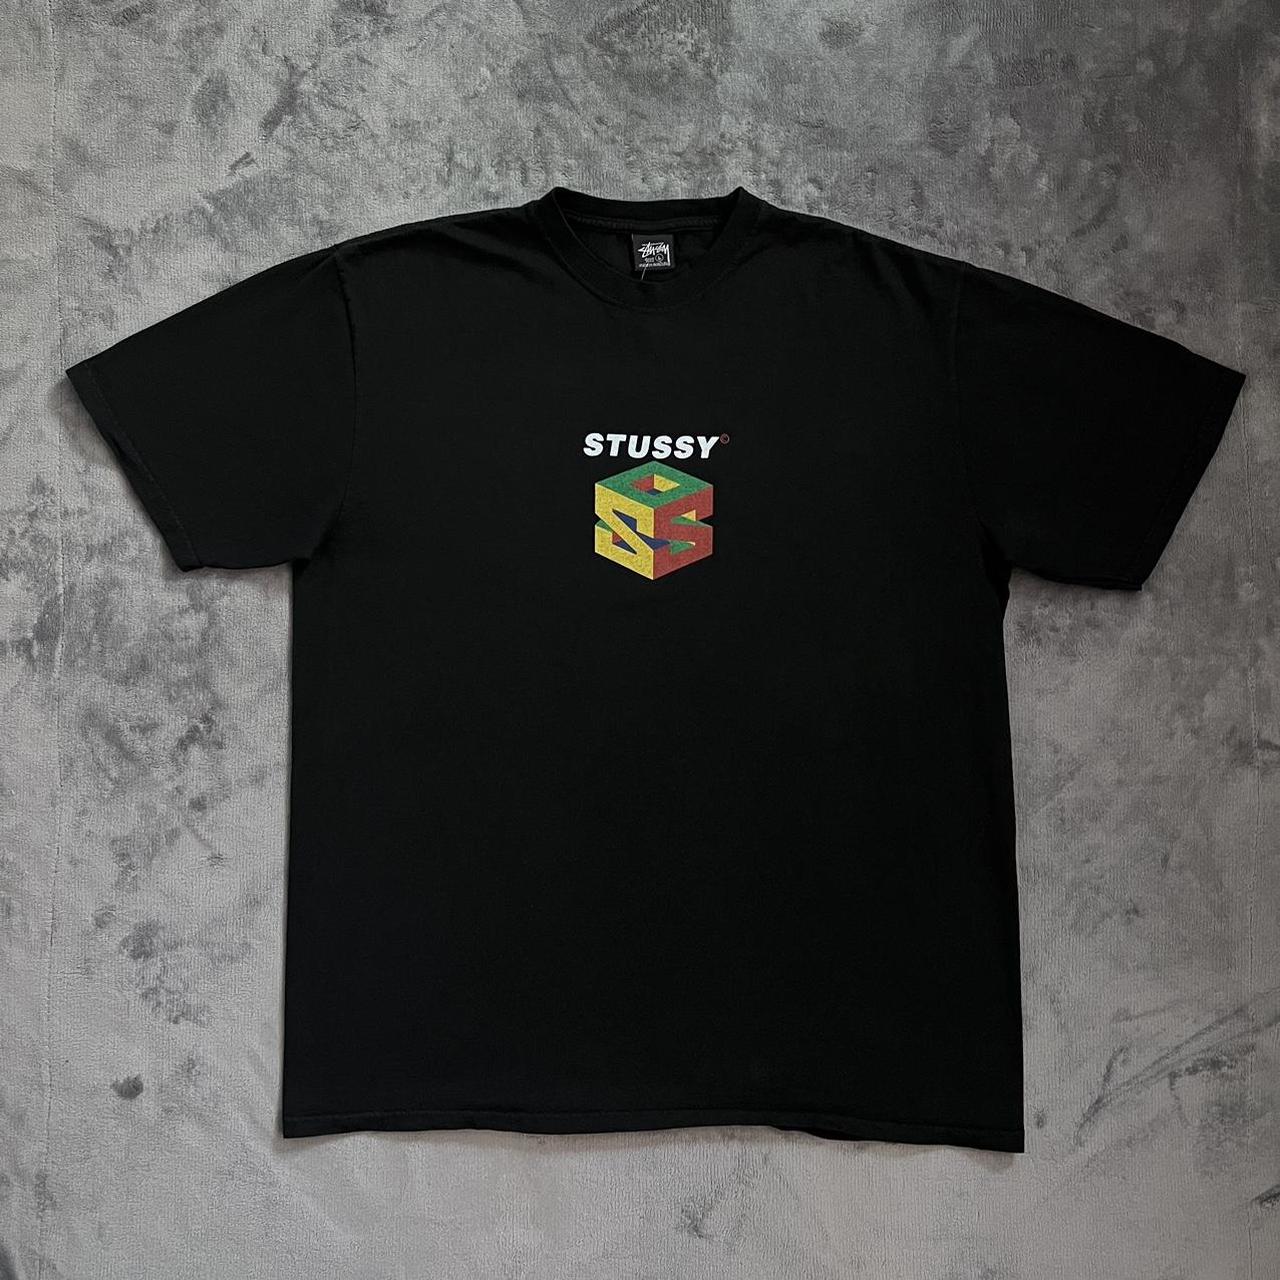 Stussy S64 Pigment Dyed Tee - Black Size L-XL, New...